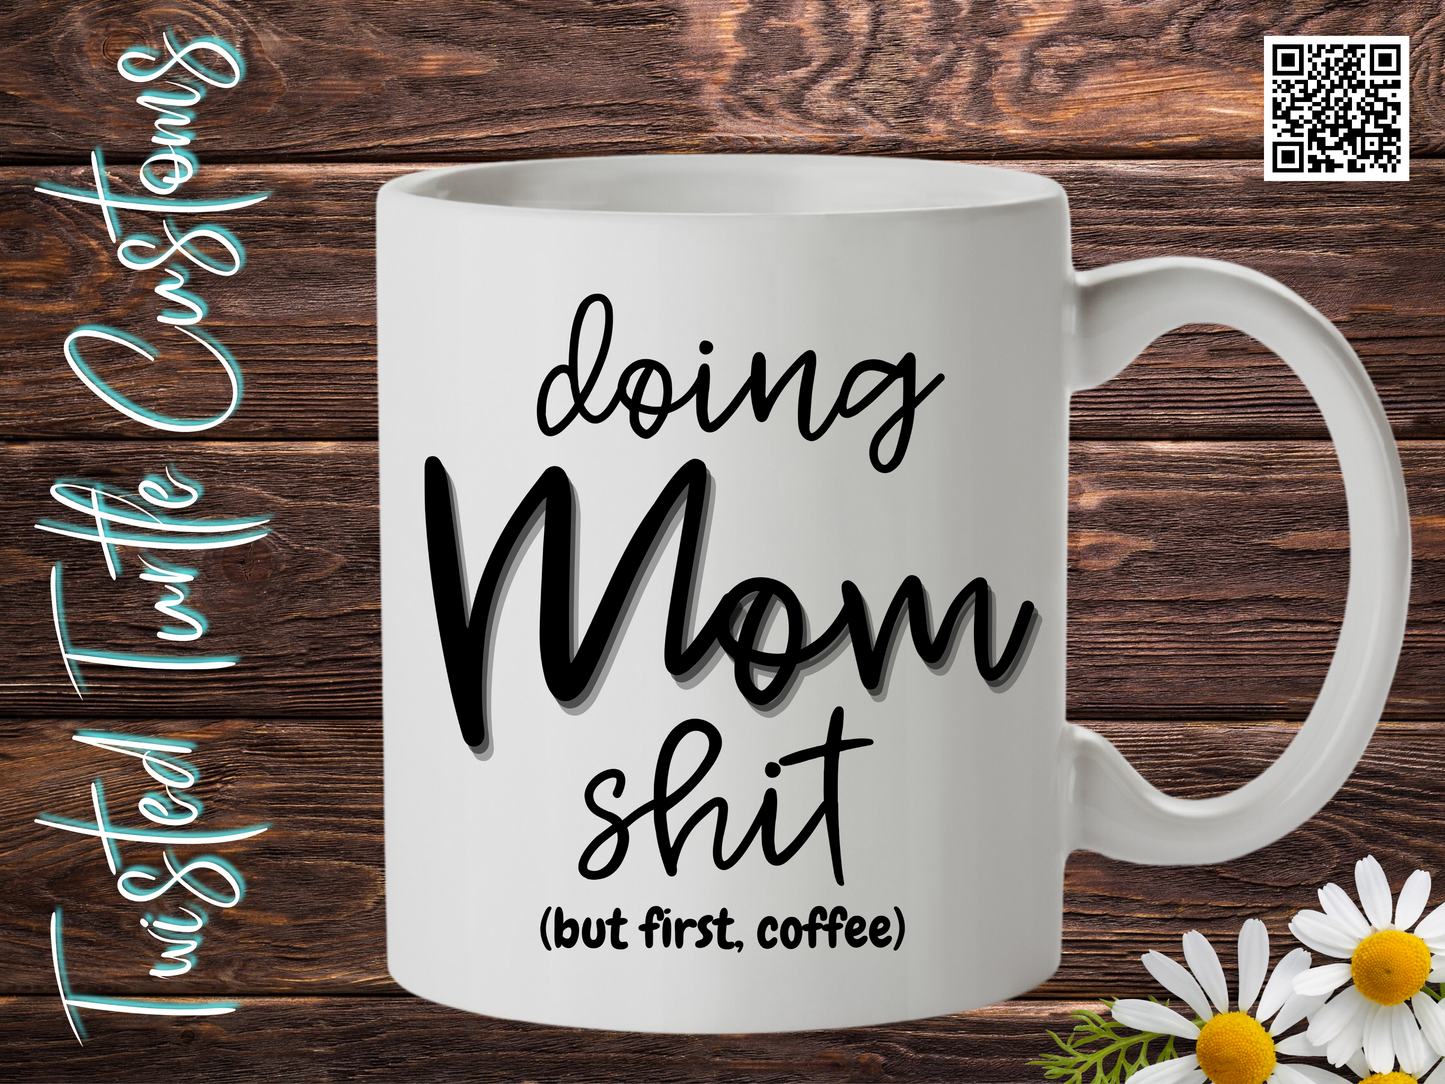 Doing Mom Shit but first coffee funny Coffee mug makes a great gift for Mom this Mother’s Day.